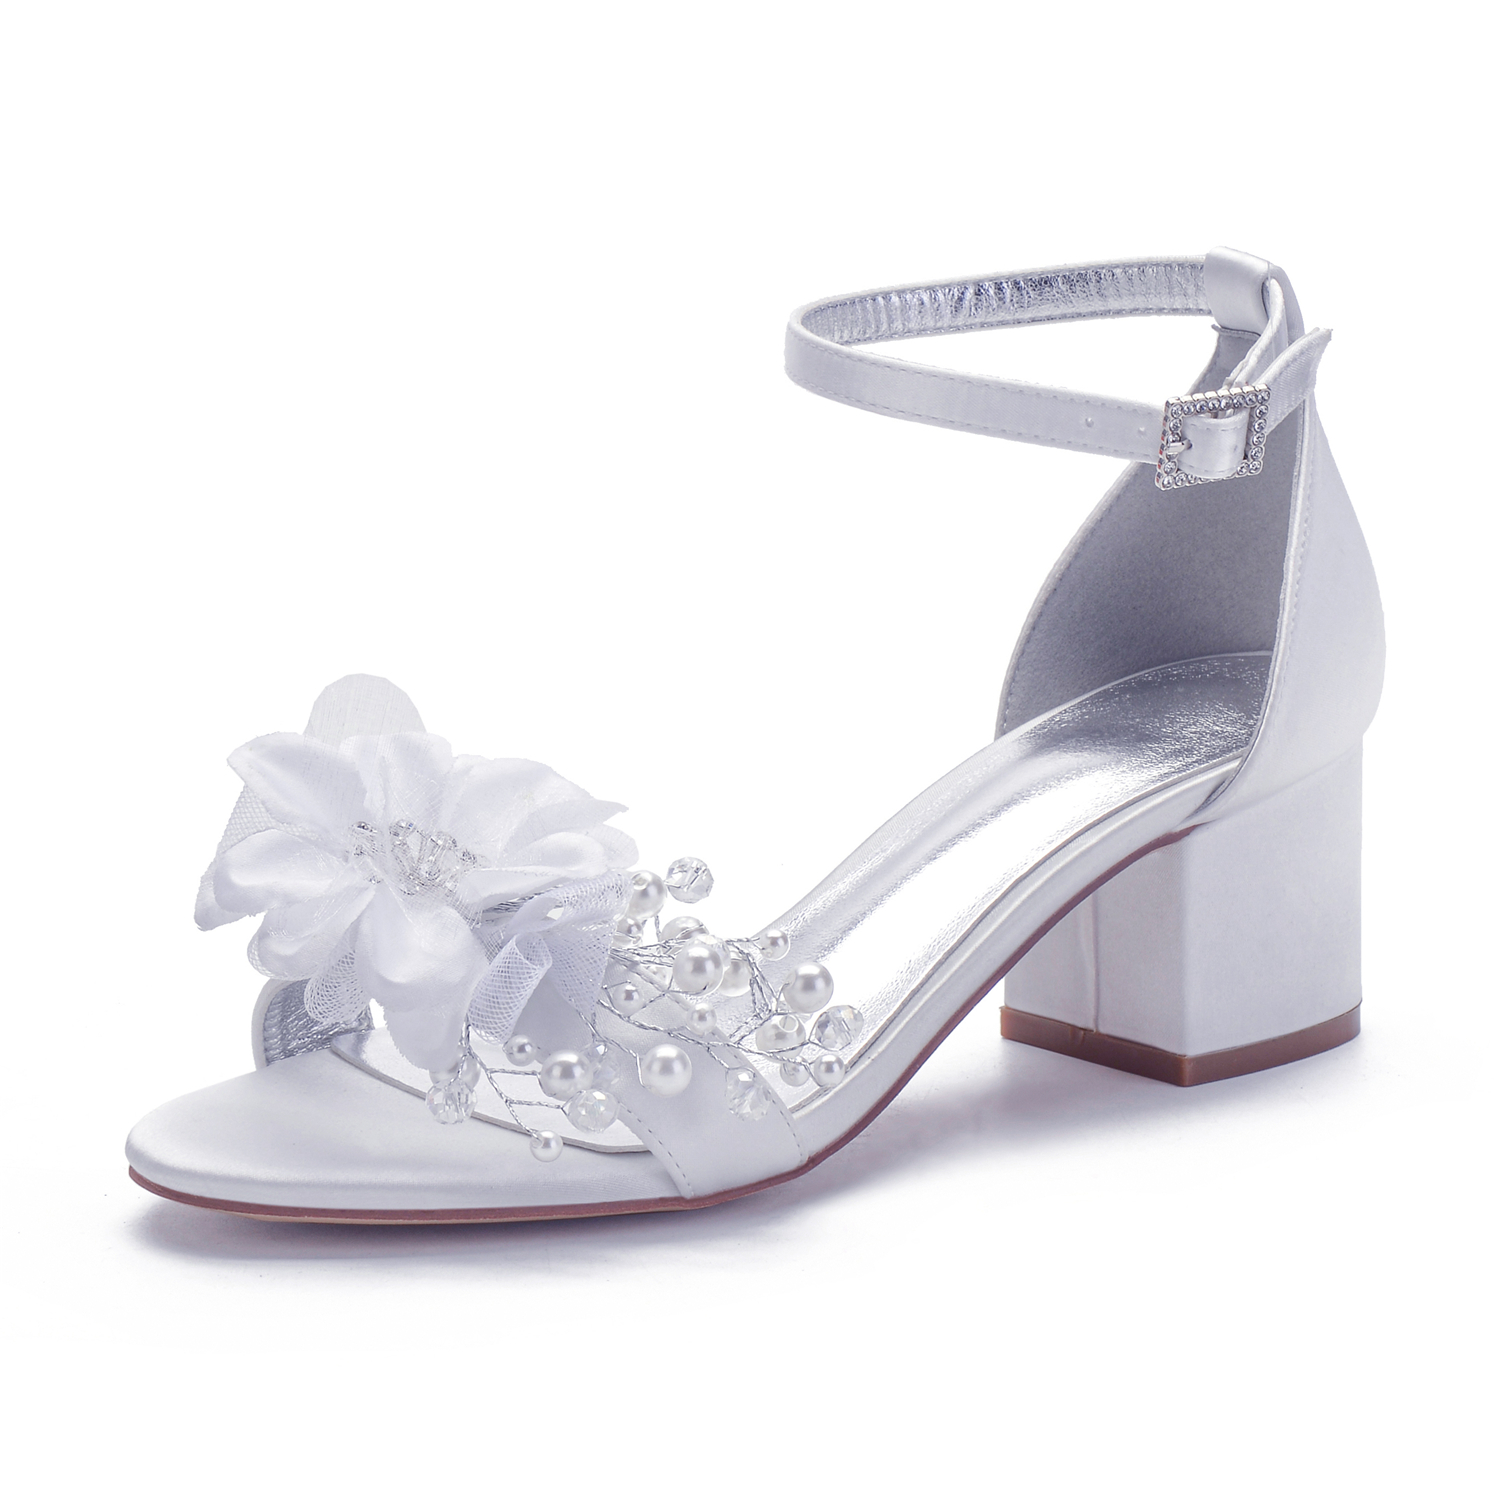 Elegant white ivory bridal shoes satin wedding sandals lower block thick heels ankle strap with flower vintage style shoes